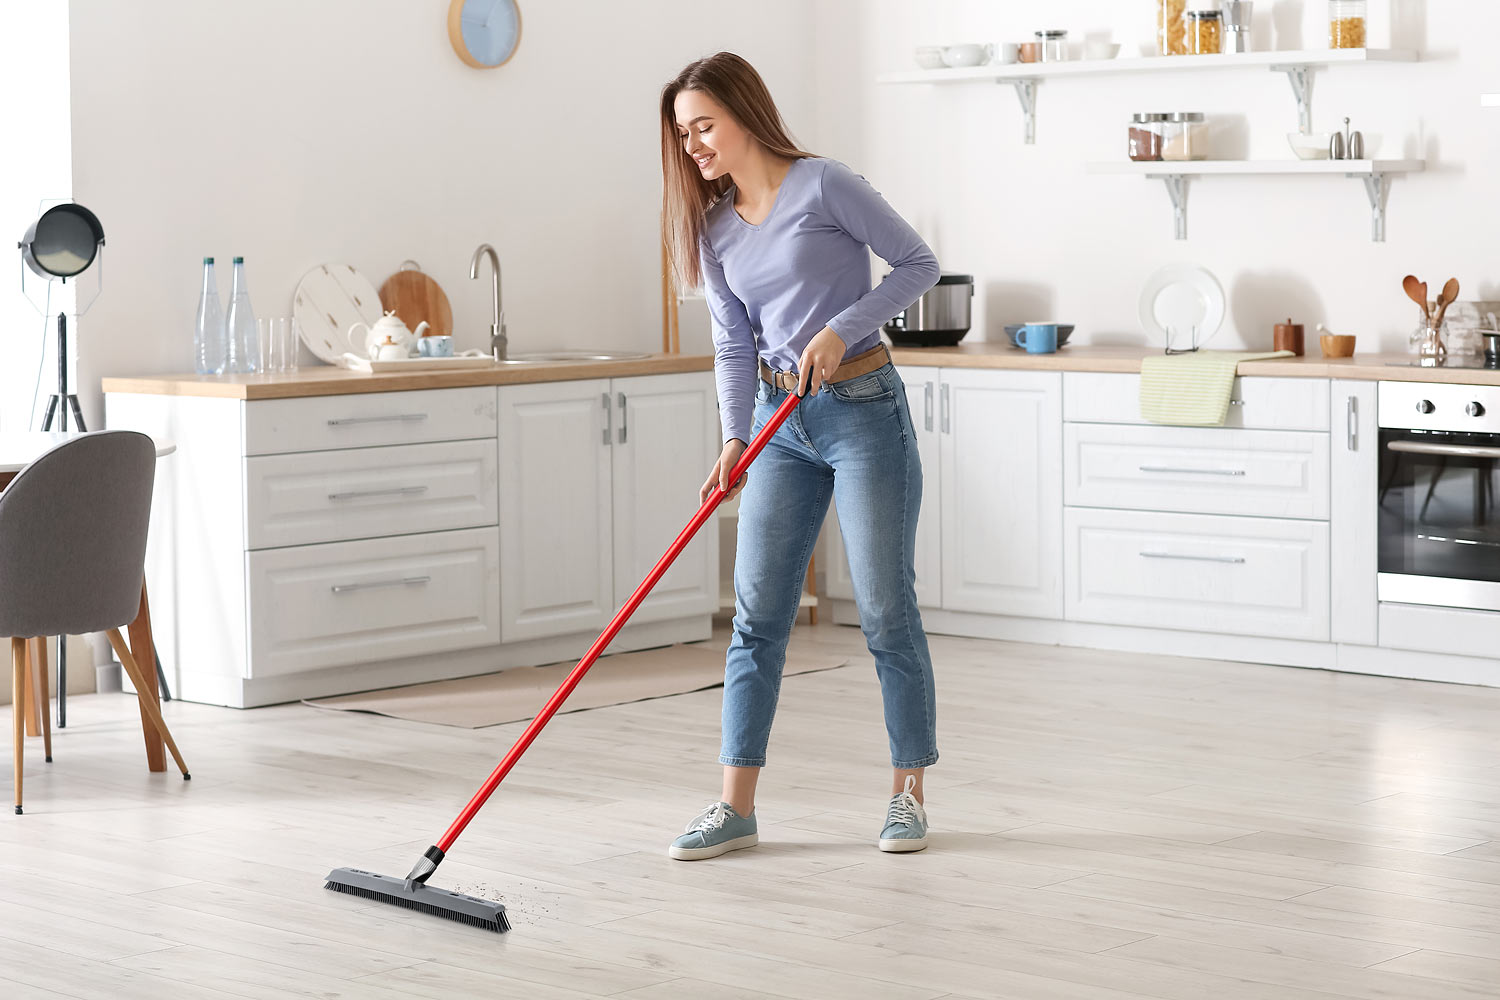 lifestyle image of a woman cleaning a floor with a brush